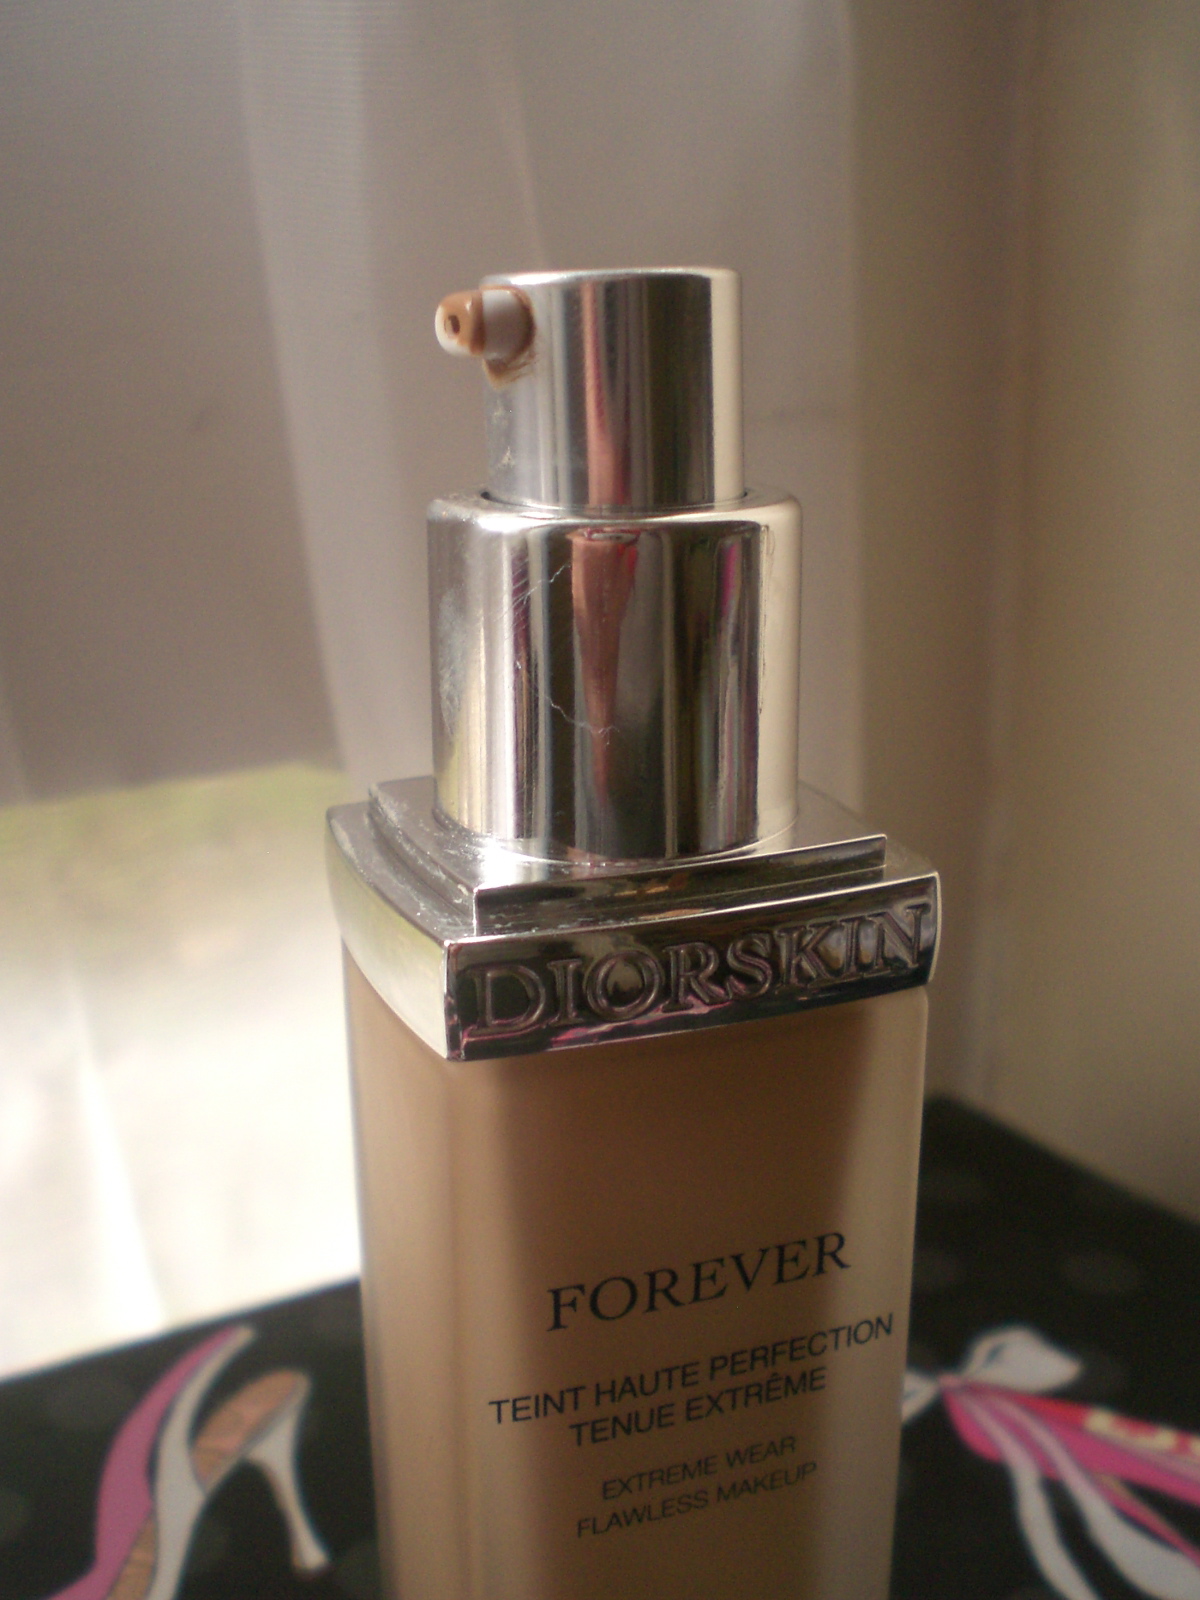 Review: Dior Diorskin Forever Foundation Review